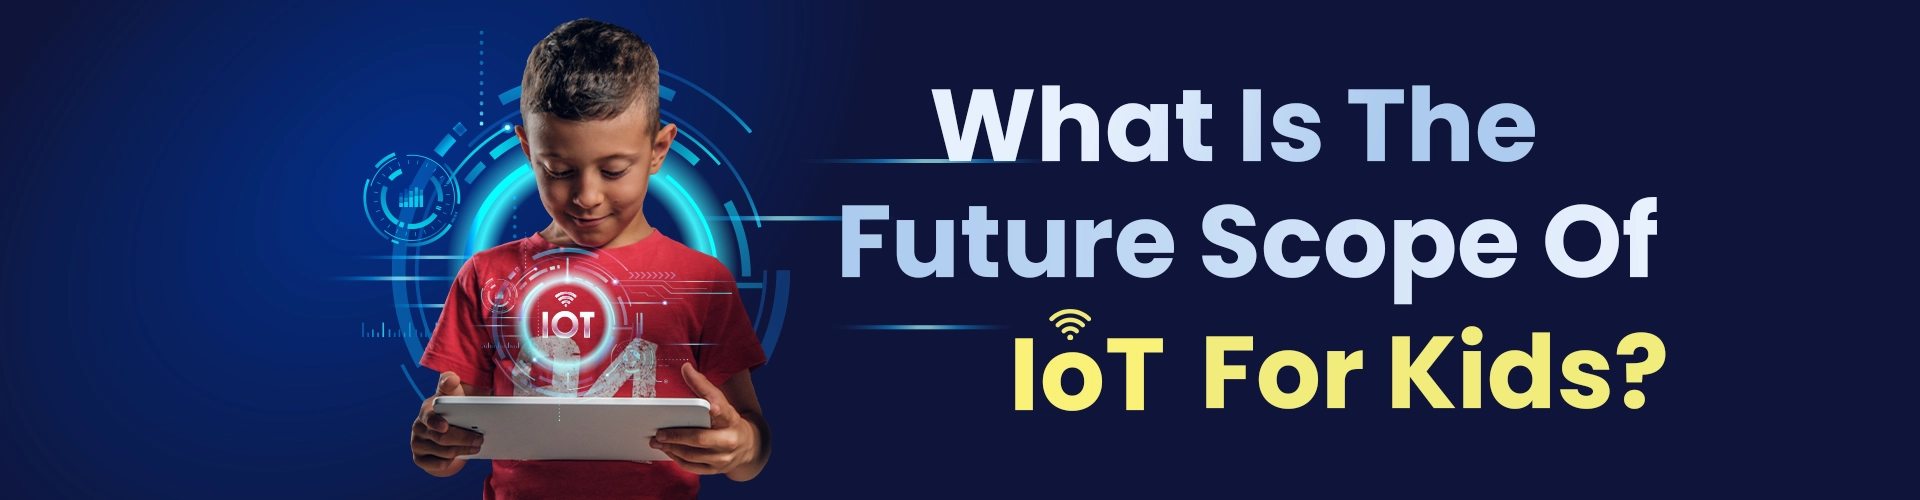 Future Scope Of IoT For Kids